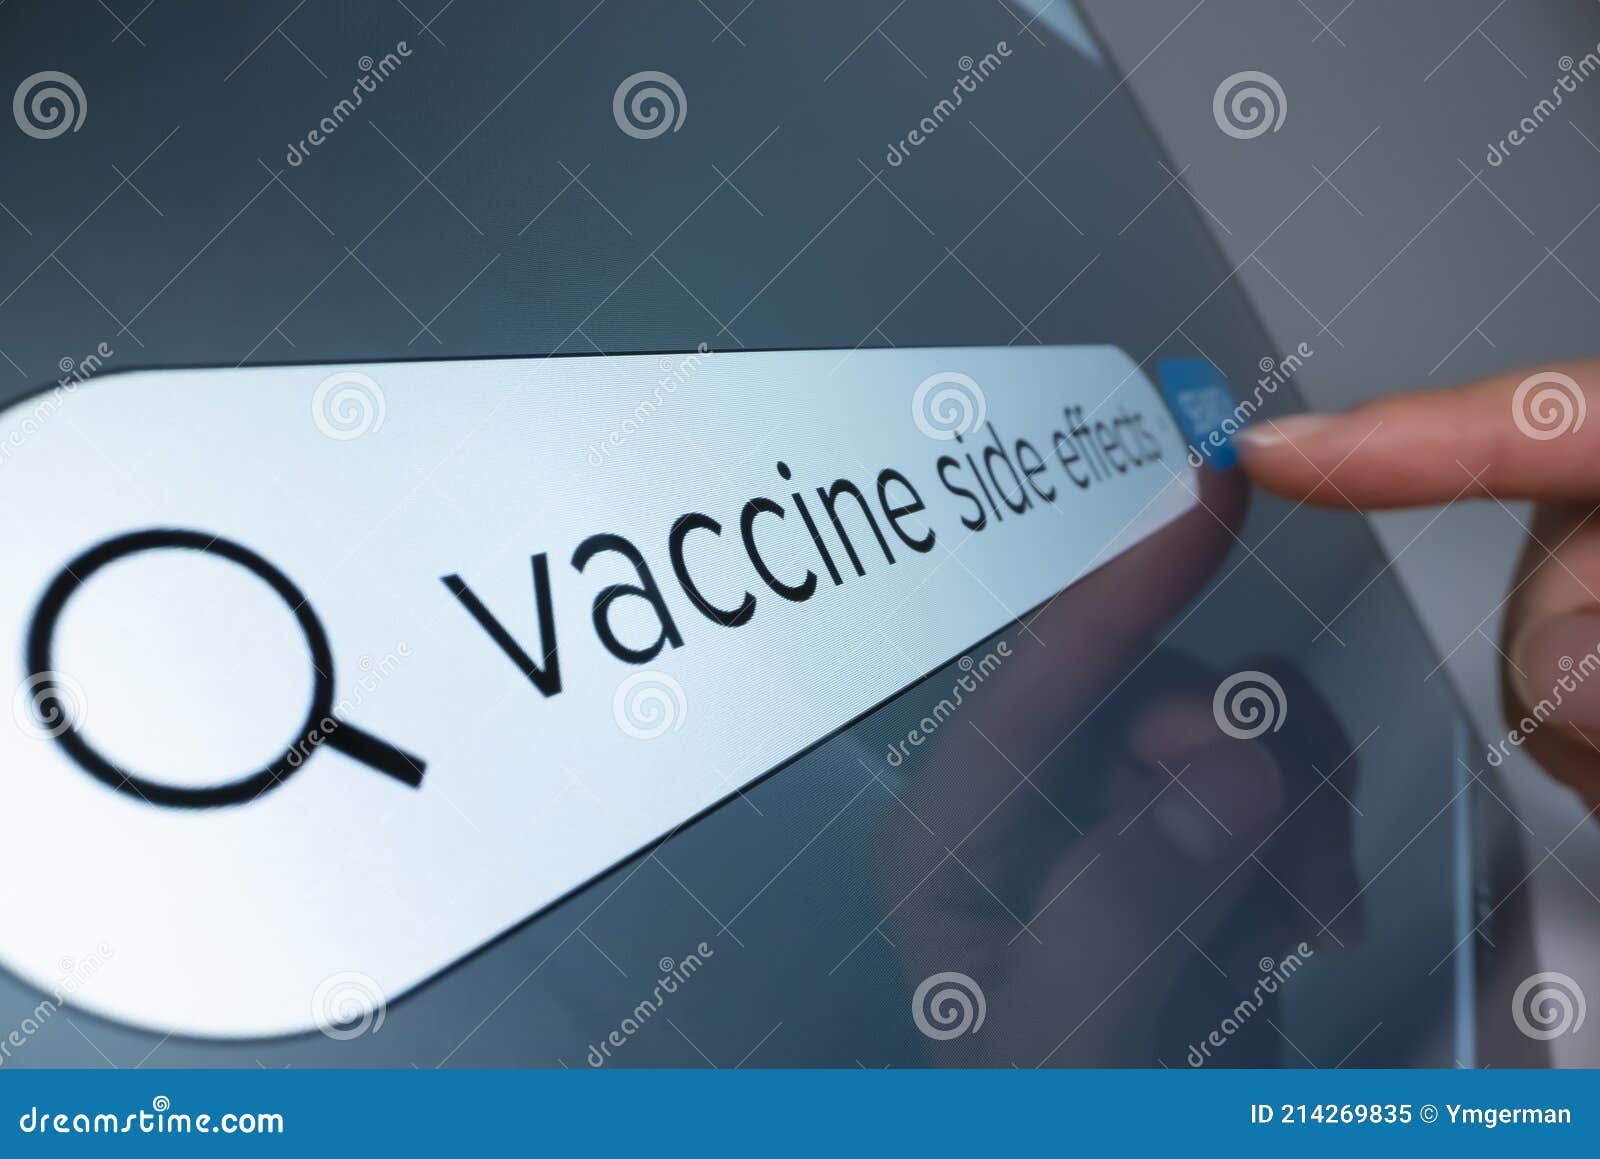 close-up view of searching information about covid vaccine side effects